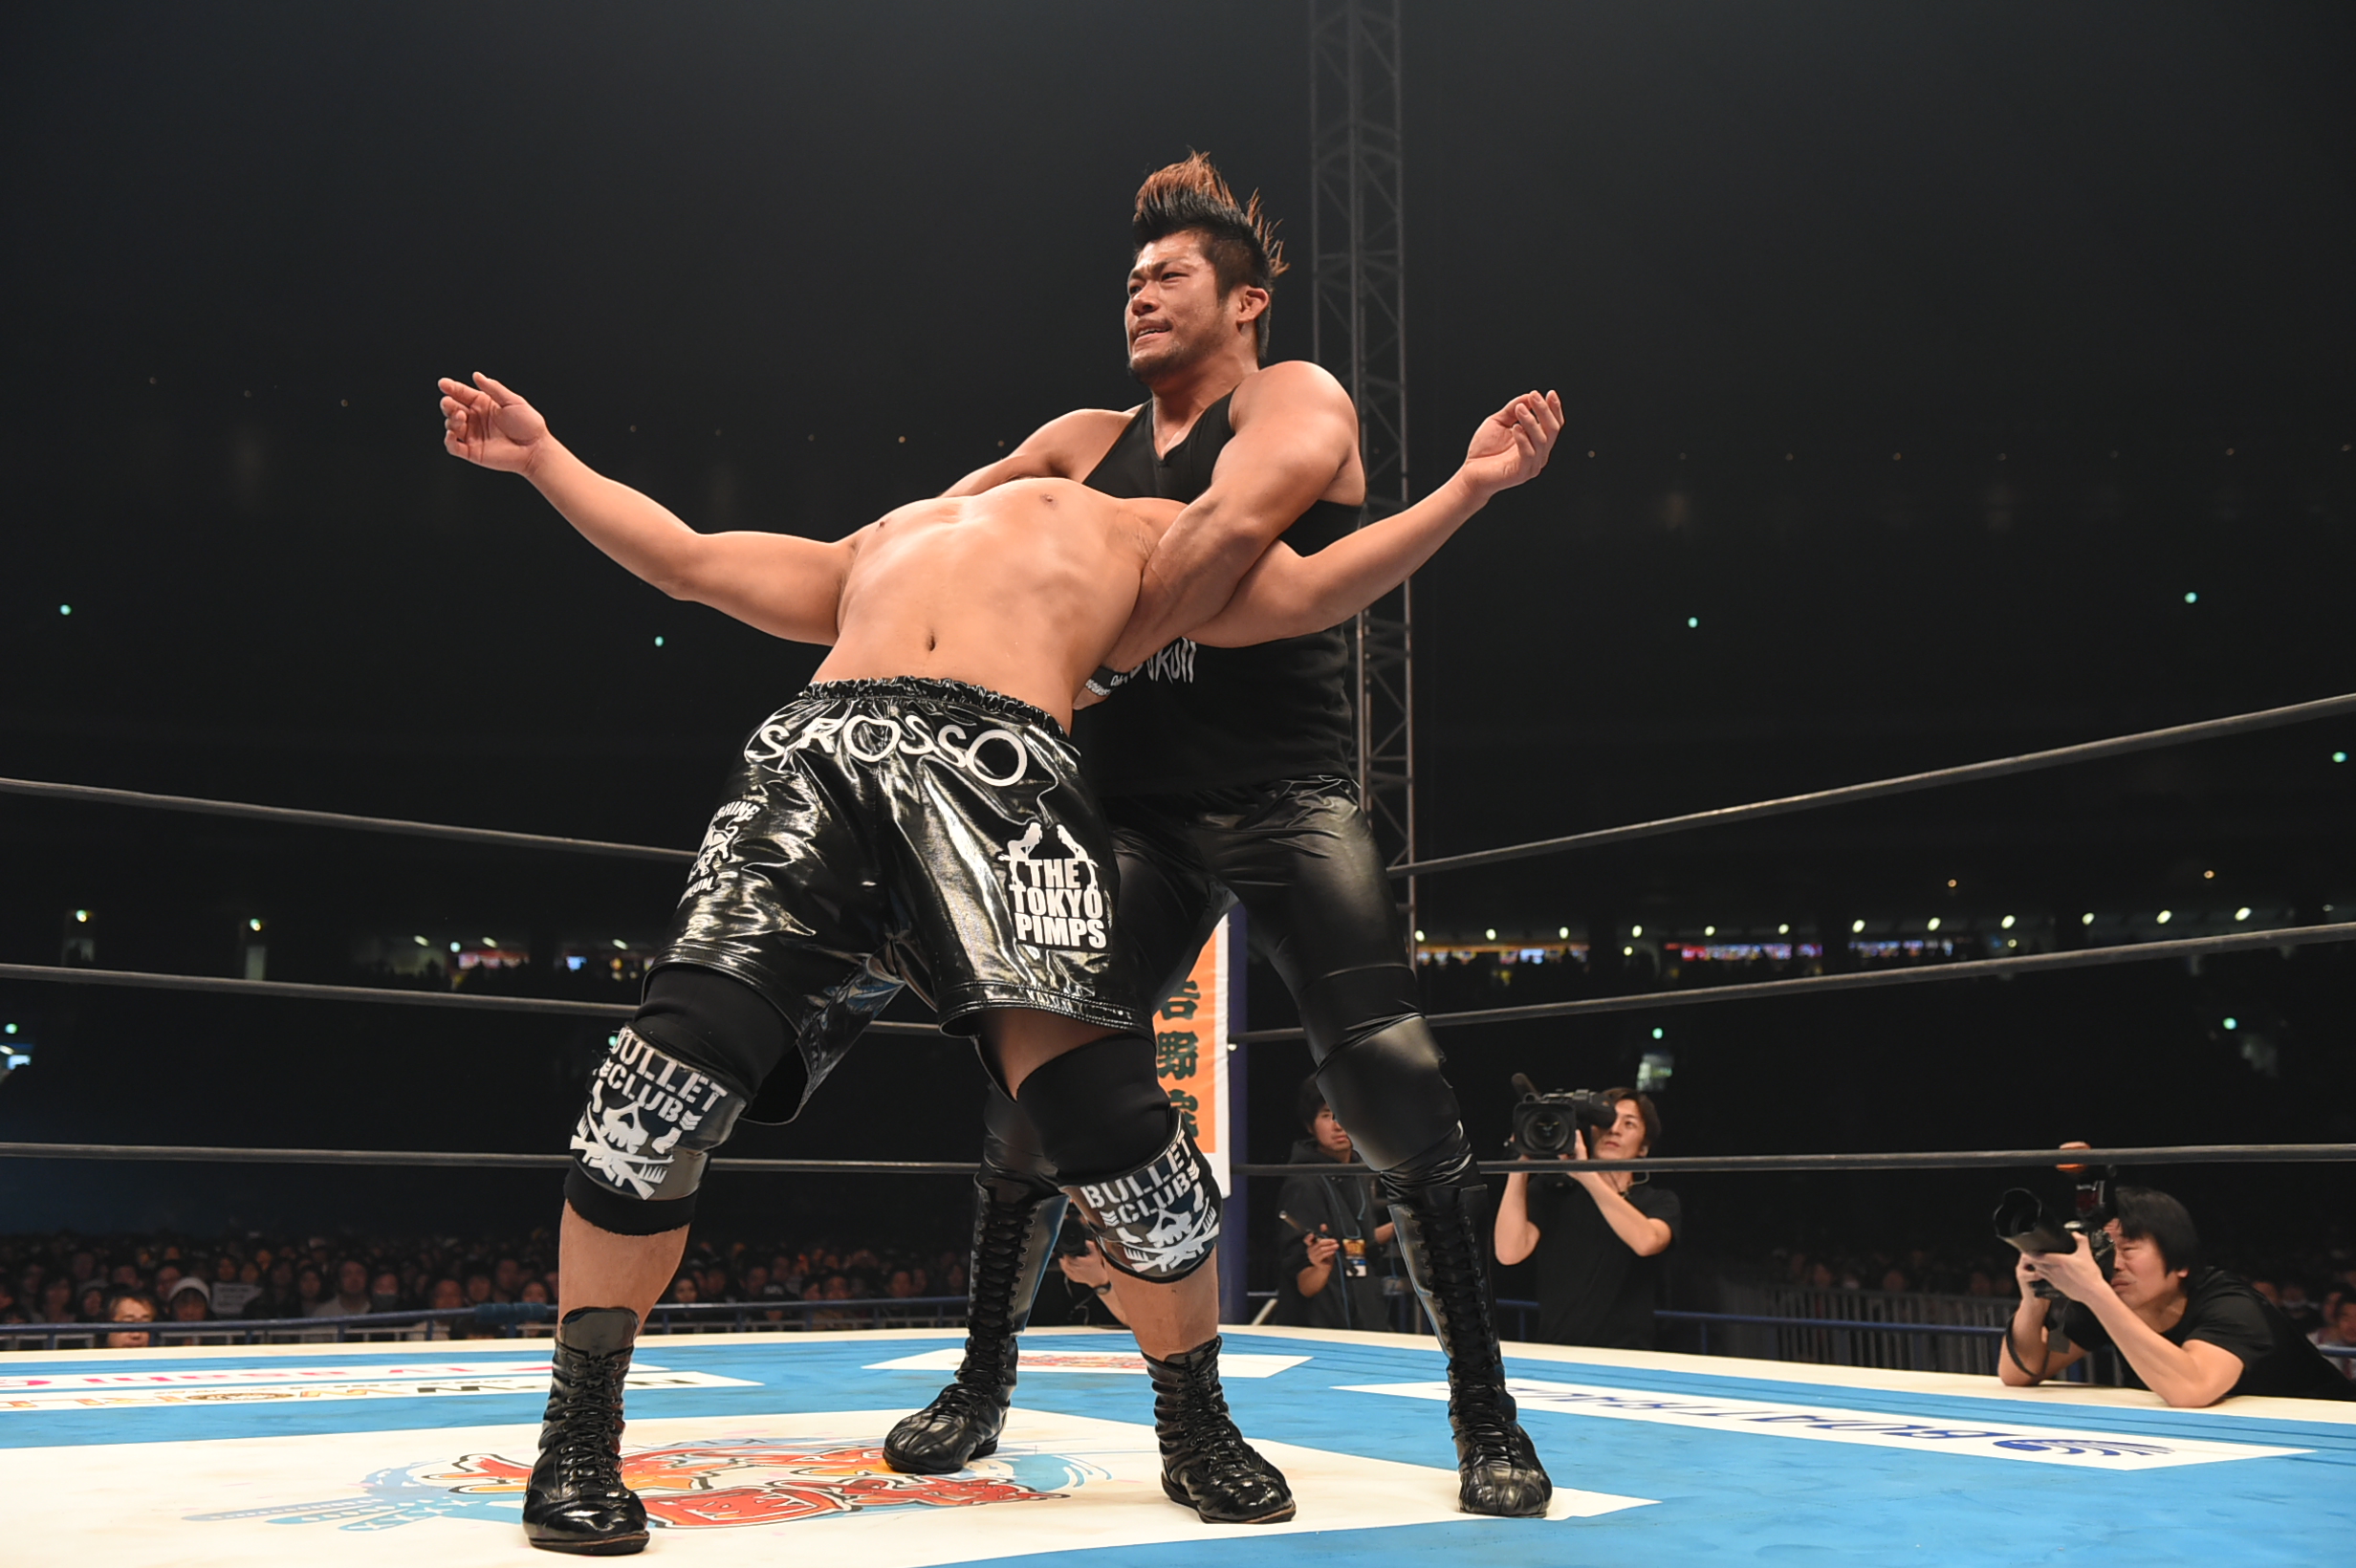 Chris Jericho Cryptically Responds To LIJ’s EVIL & SANADA Saying He’s Scared To Show Up At NJPW’s G1 Special